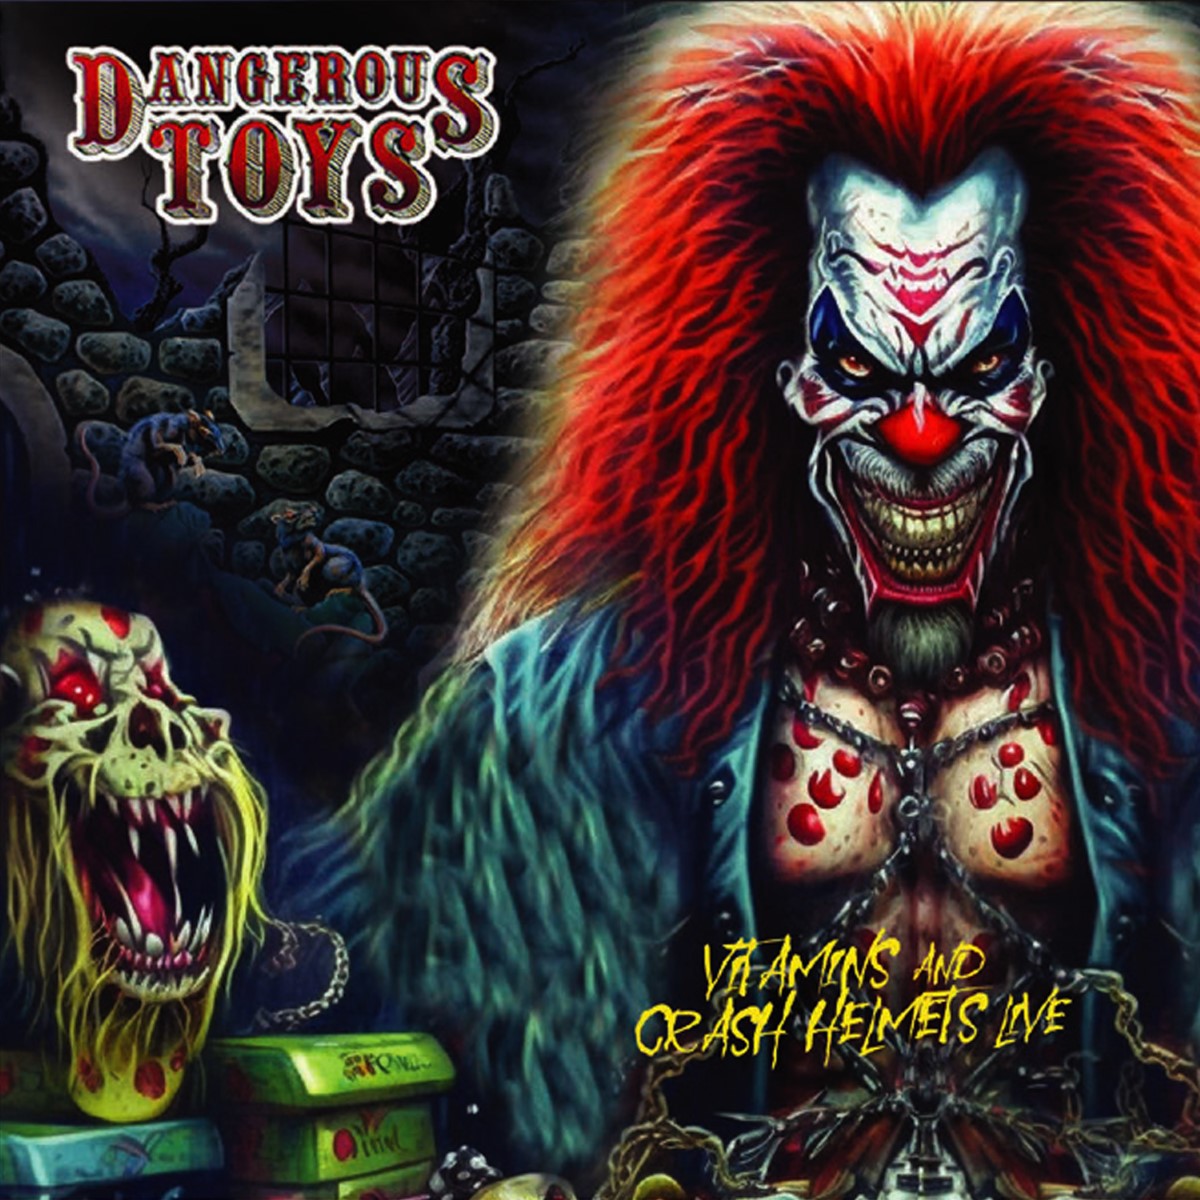 DANGEROUS TOYS Live Album Gets Reissued & Pressed On Vinyl For The First Time!